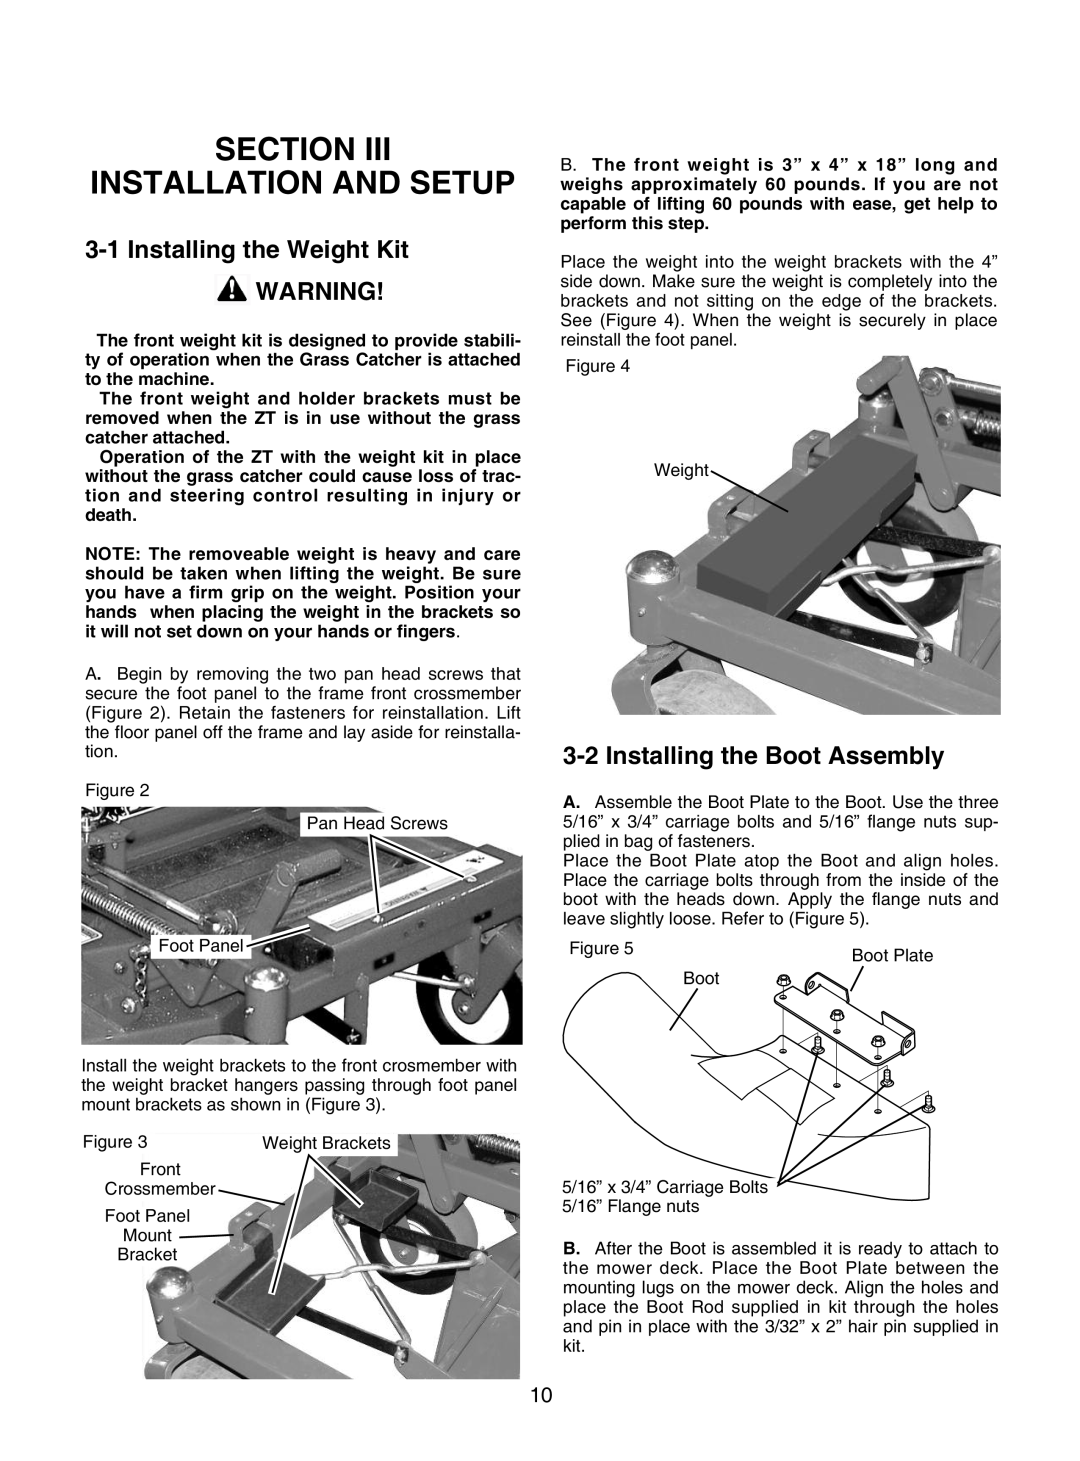 Bush Hog GC-250 Section Installation And Setup, 3-1Installing the Weight Kit ! WARNING, 3-2Installing the Boot Assembly 